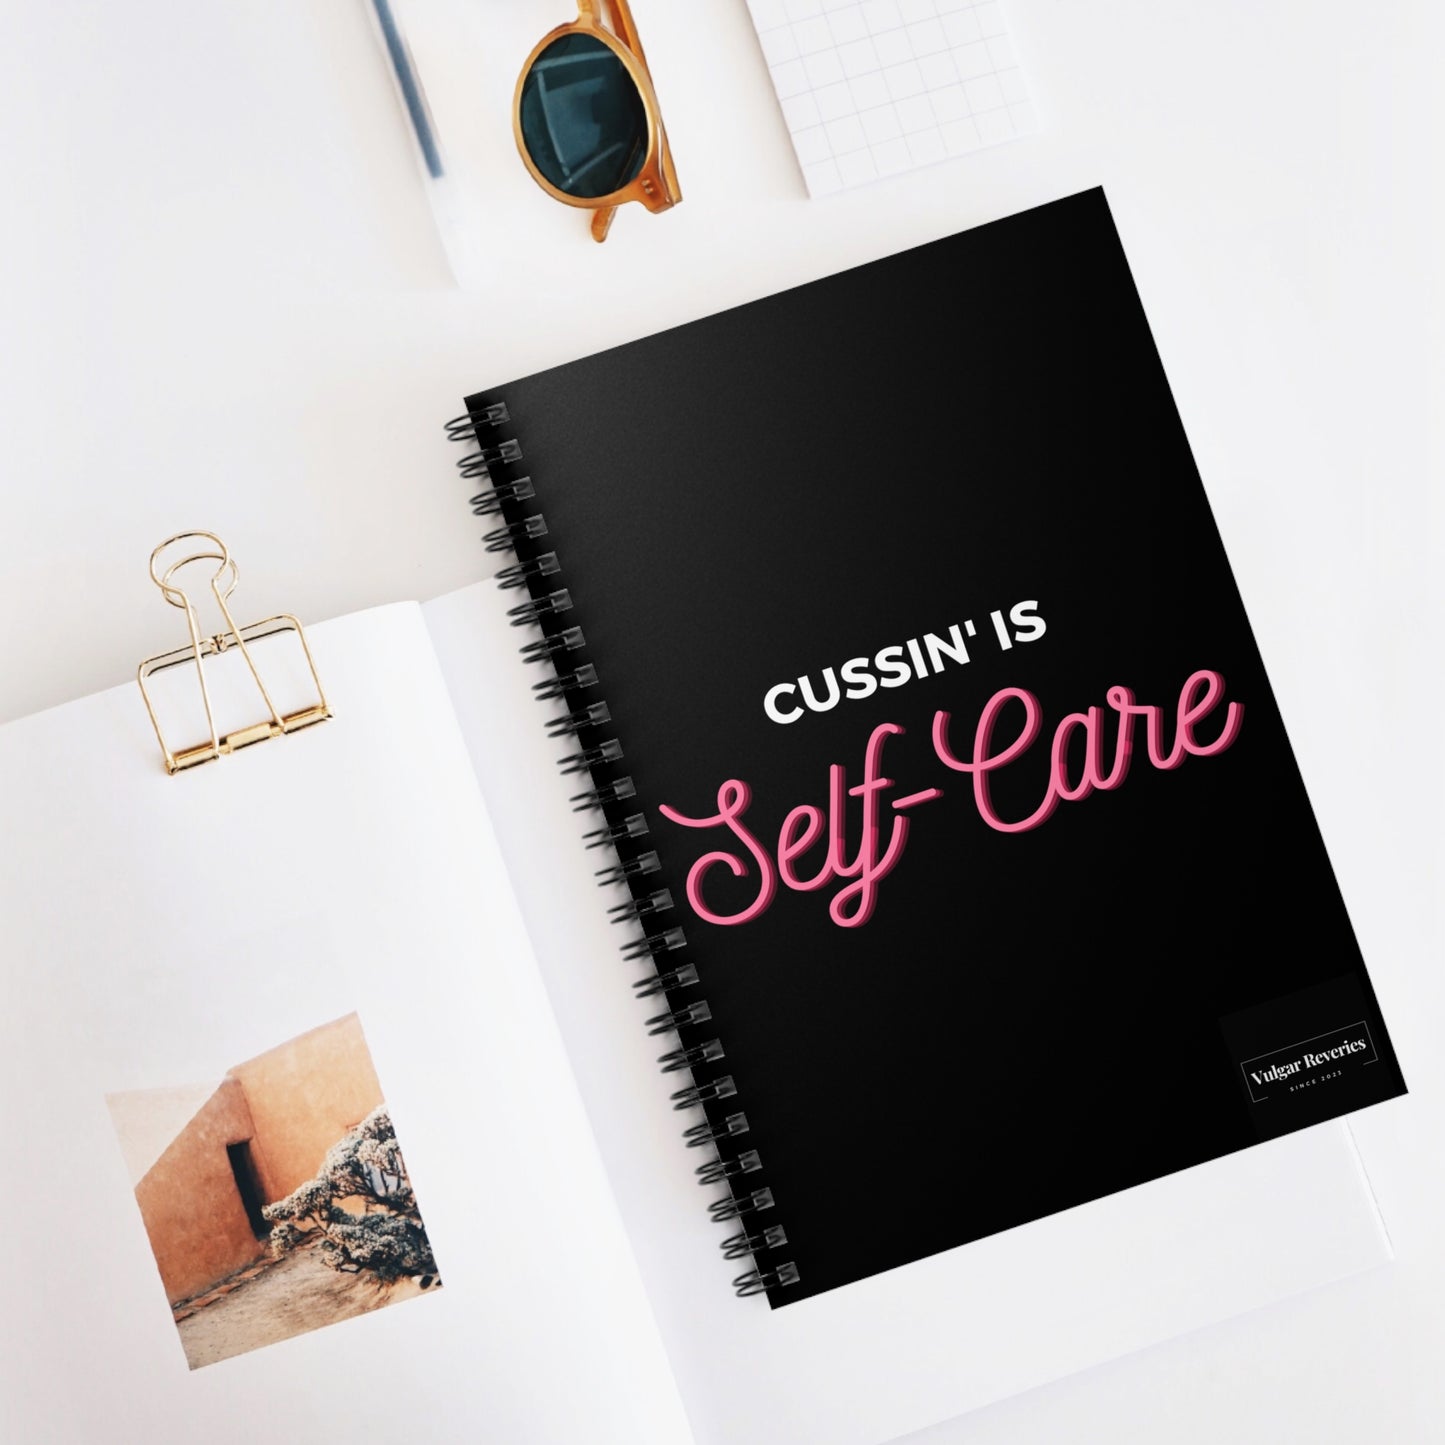 Cussin' is Self-Care - Spiral Notebook - Ruled Line